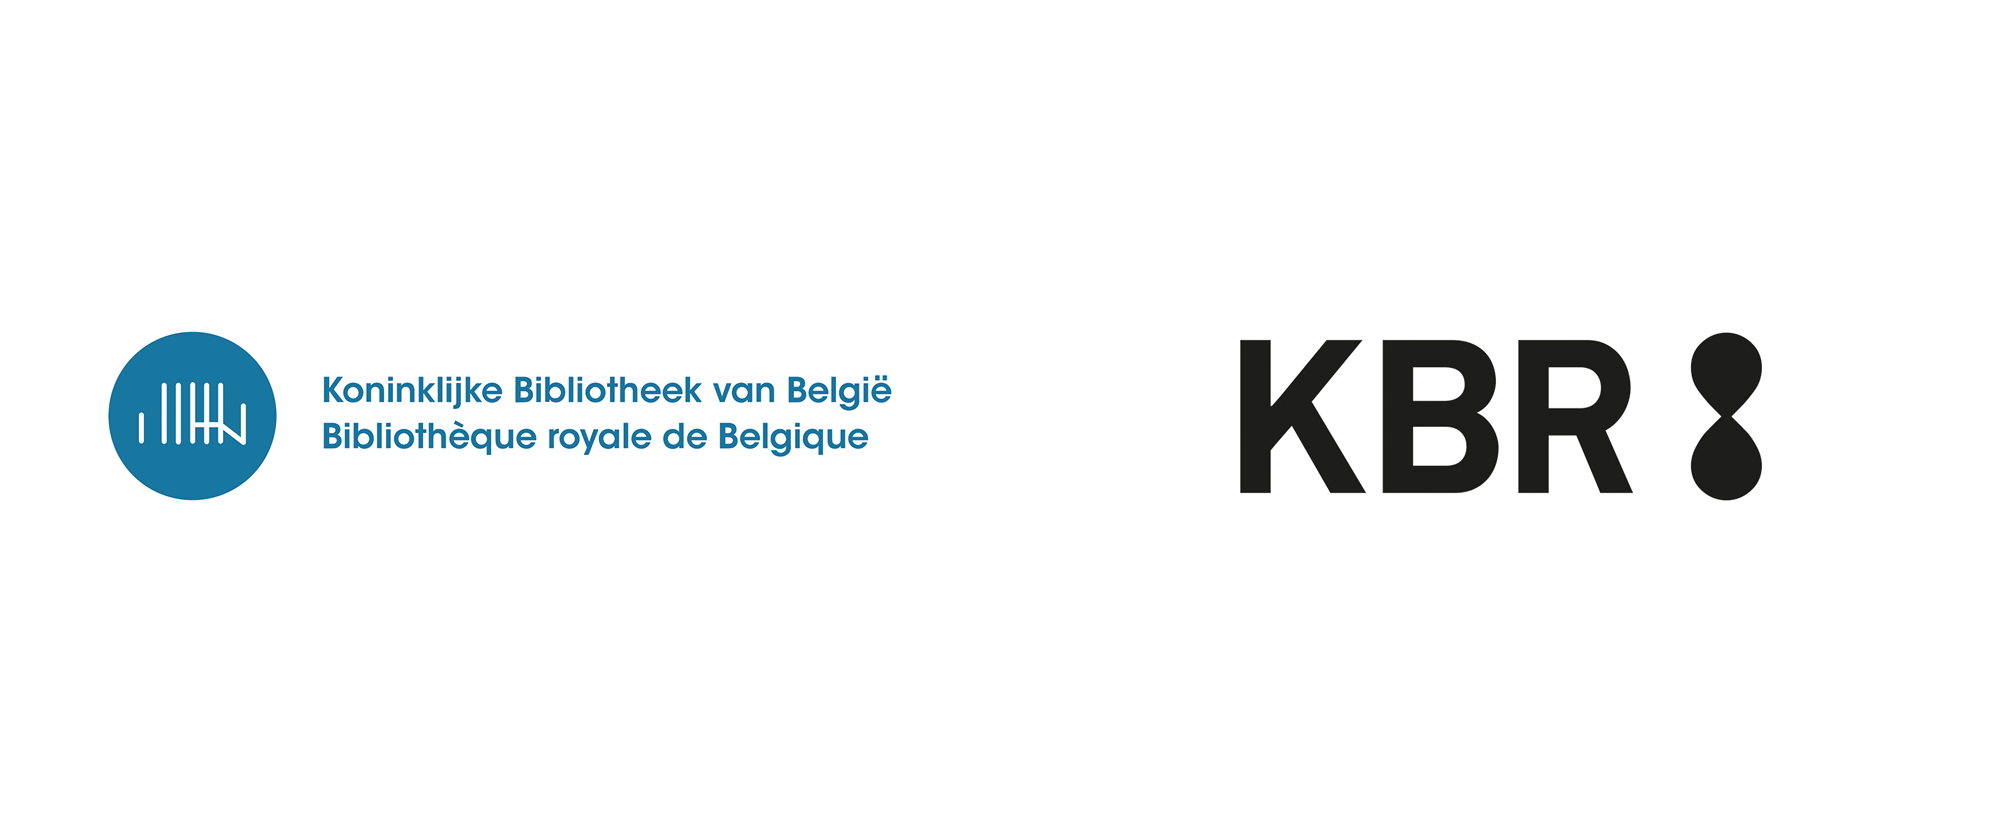 KBR Logo - Brand New: New Logo and Identity for KBR by Teamm, Dyncomm, and ...